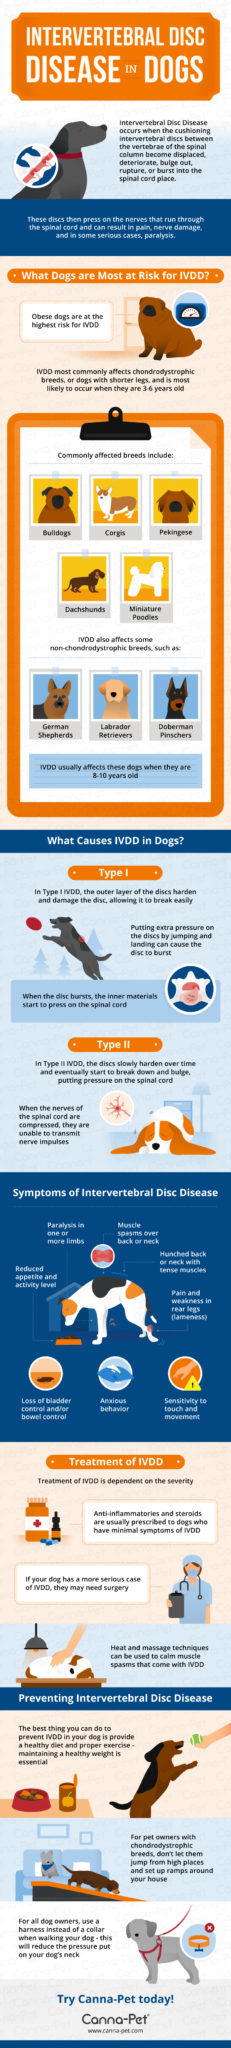 IVDD in Dogs Infographic